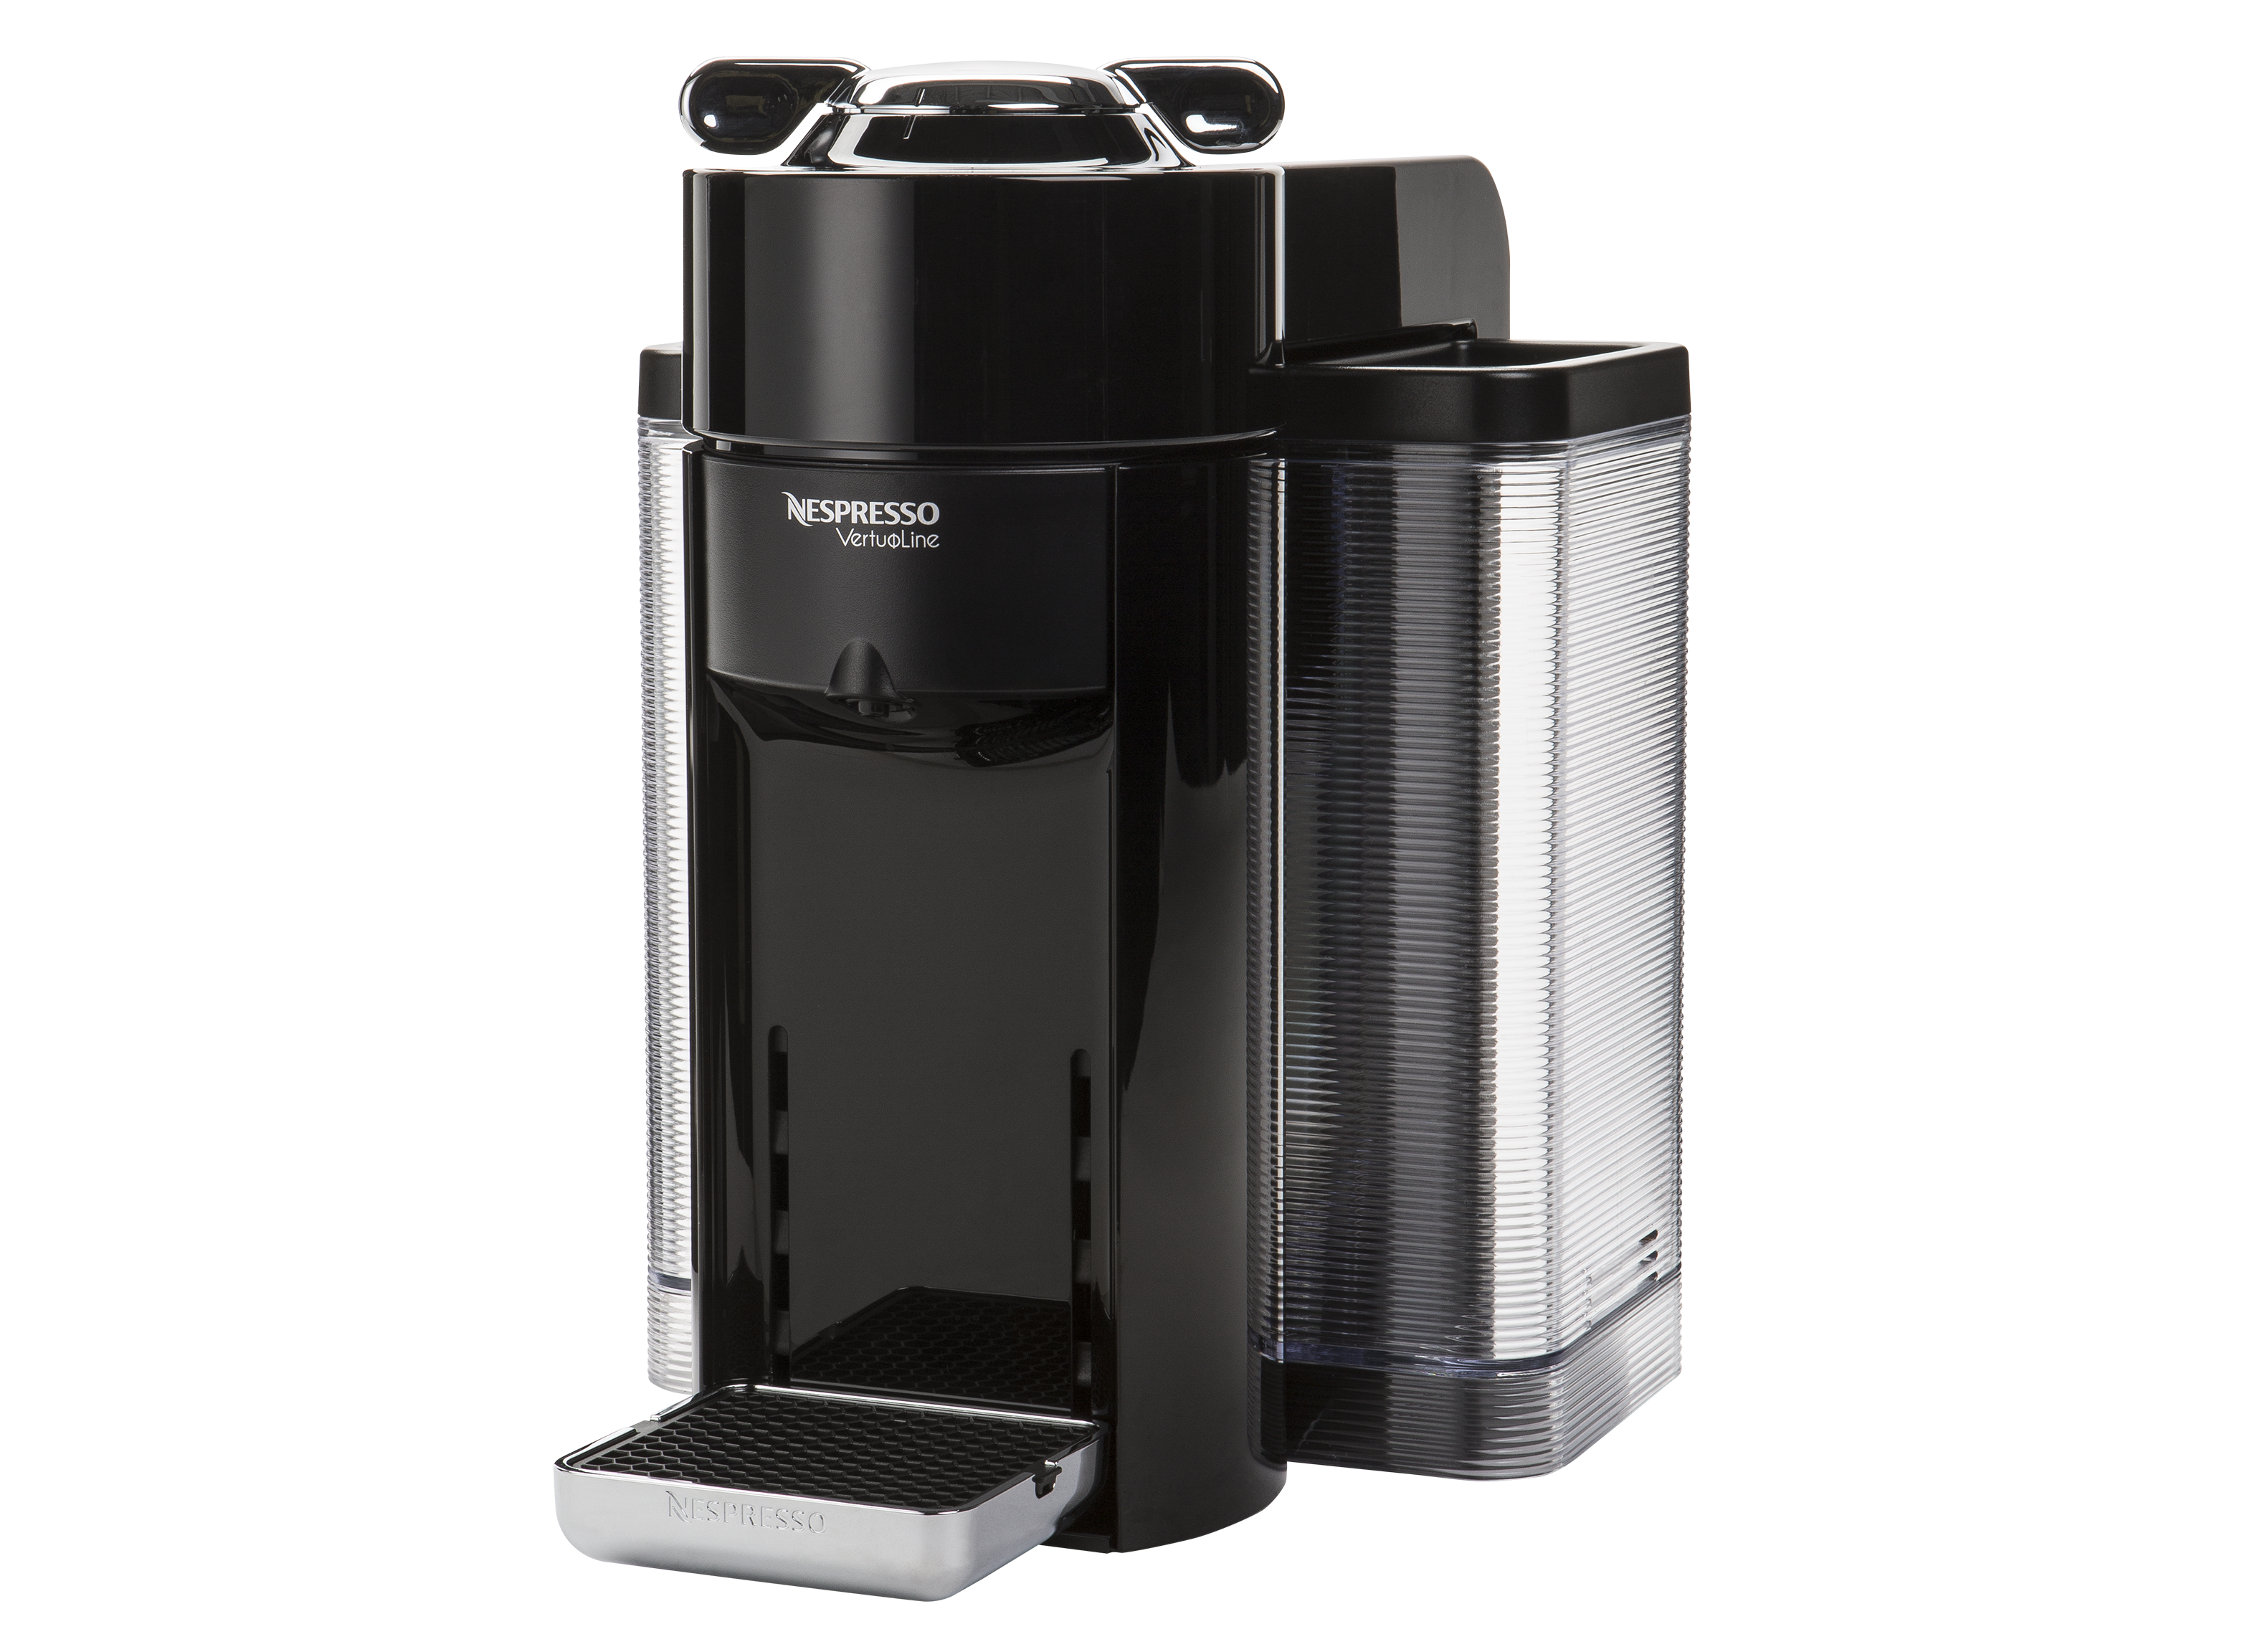 https://crdms.images.consumerreports.org/prod/products/cr/models/385254-singleservecoffeemakers-nespresso-vertuolineevoluodeluxe.png